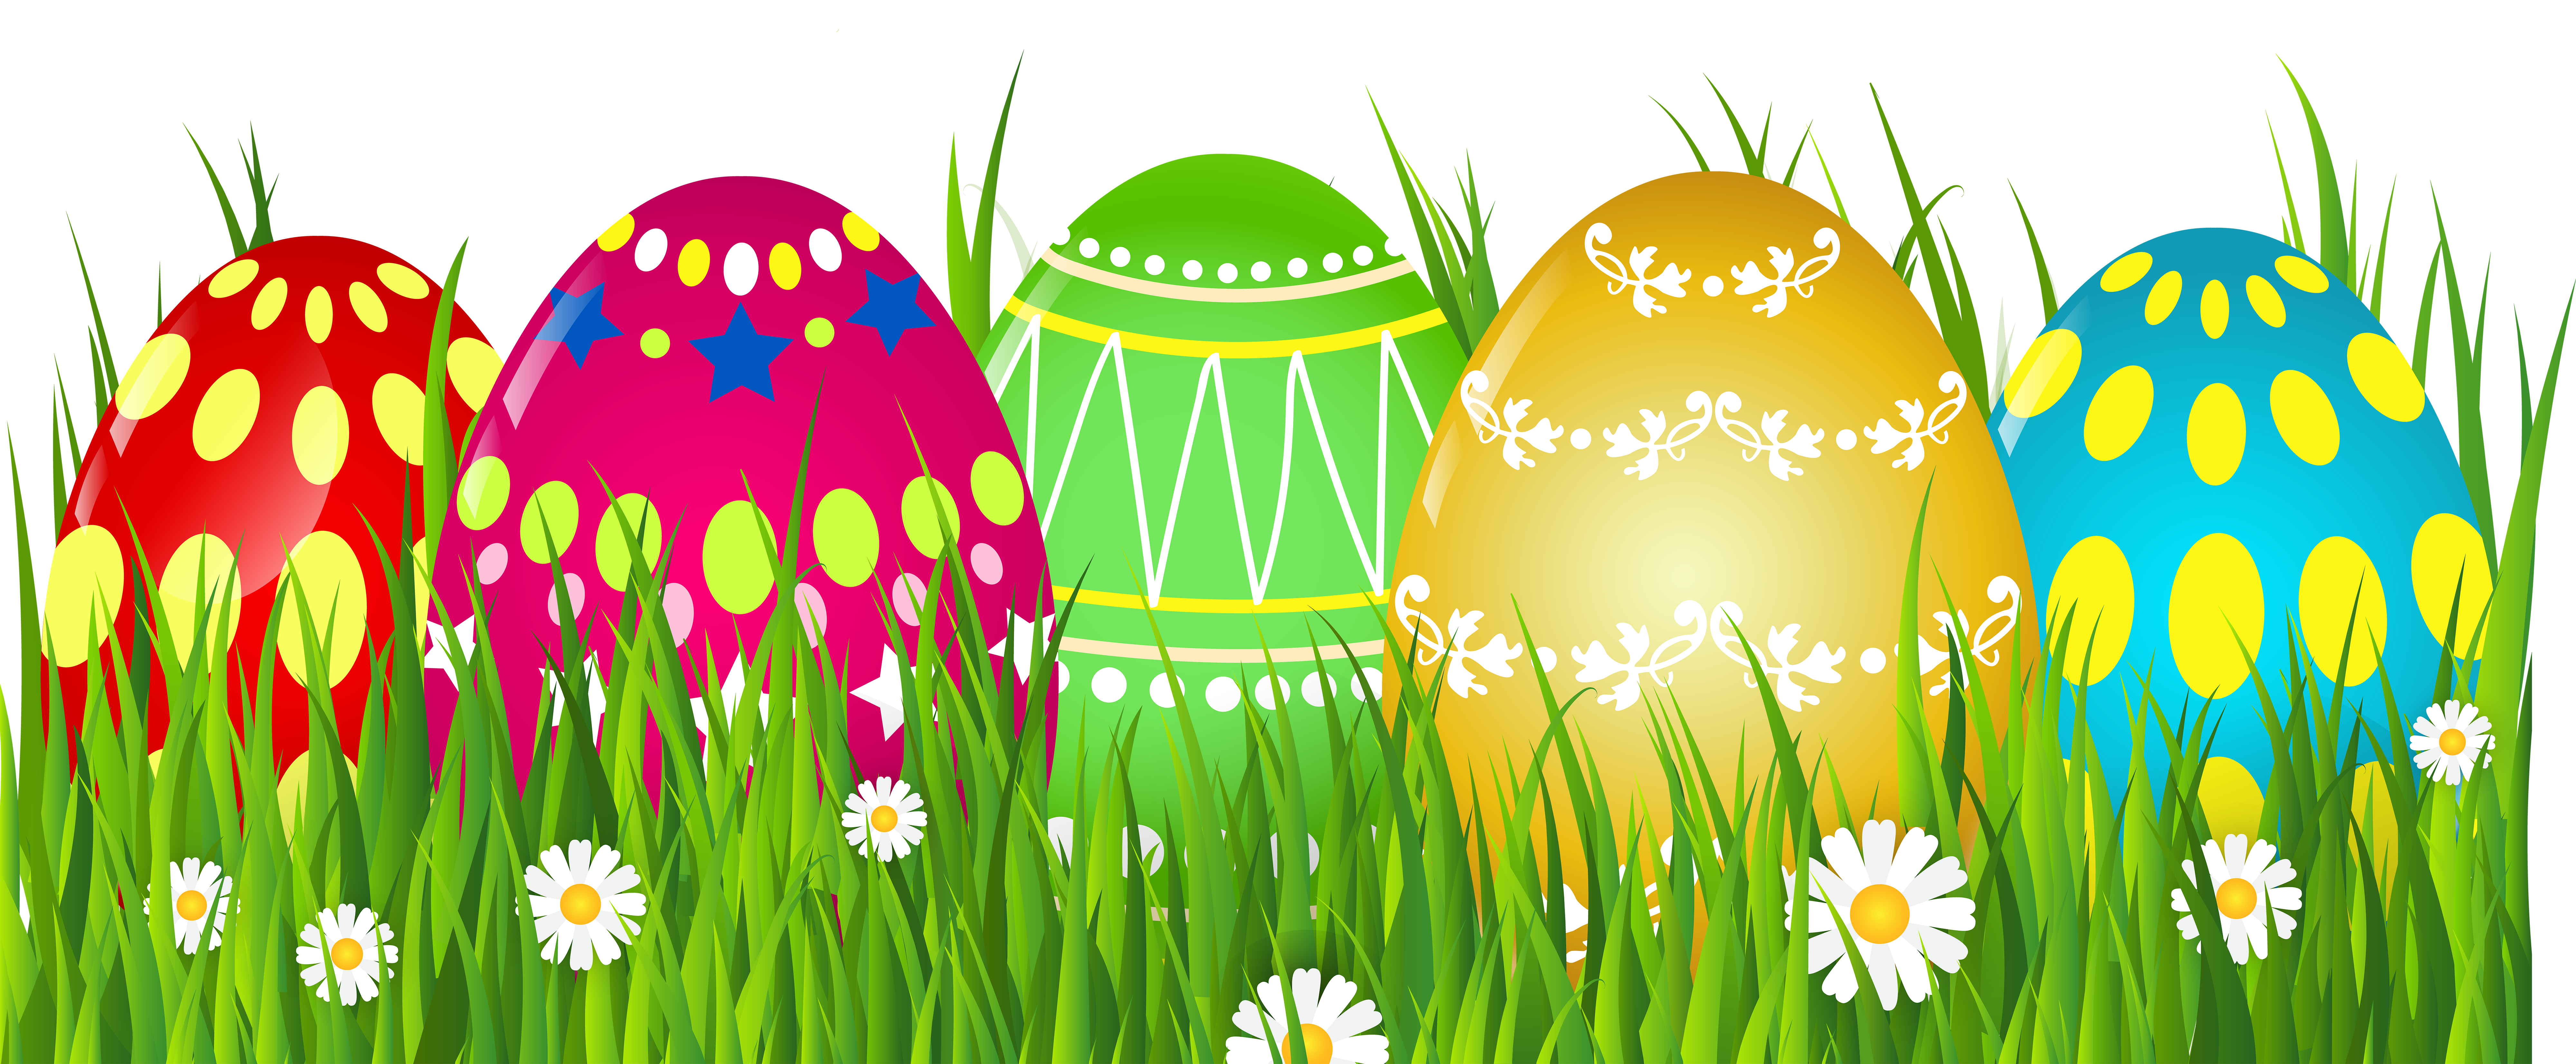 Easter Grass Clipart Image.